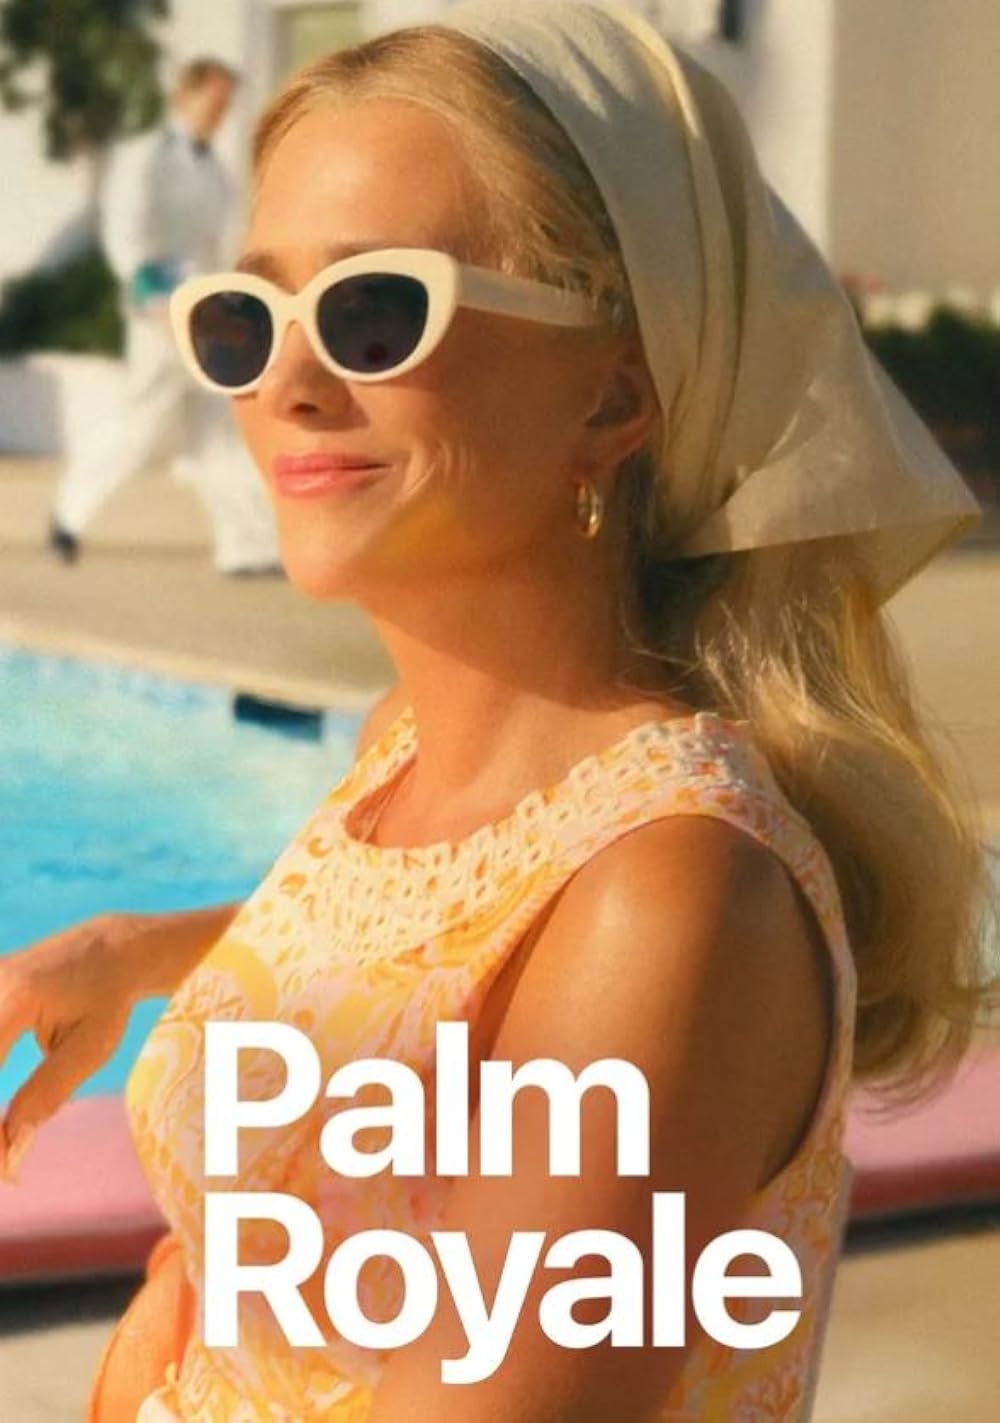 'Palm Royale hits Apple TV+ on March 20th!' core news picture